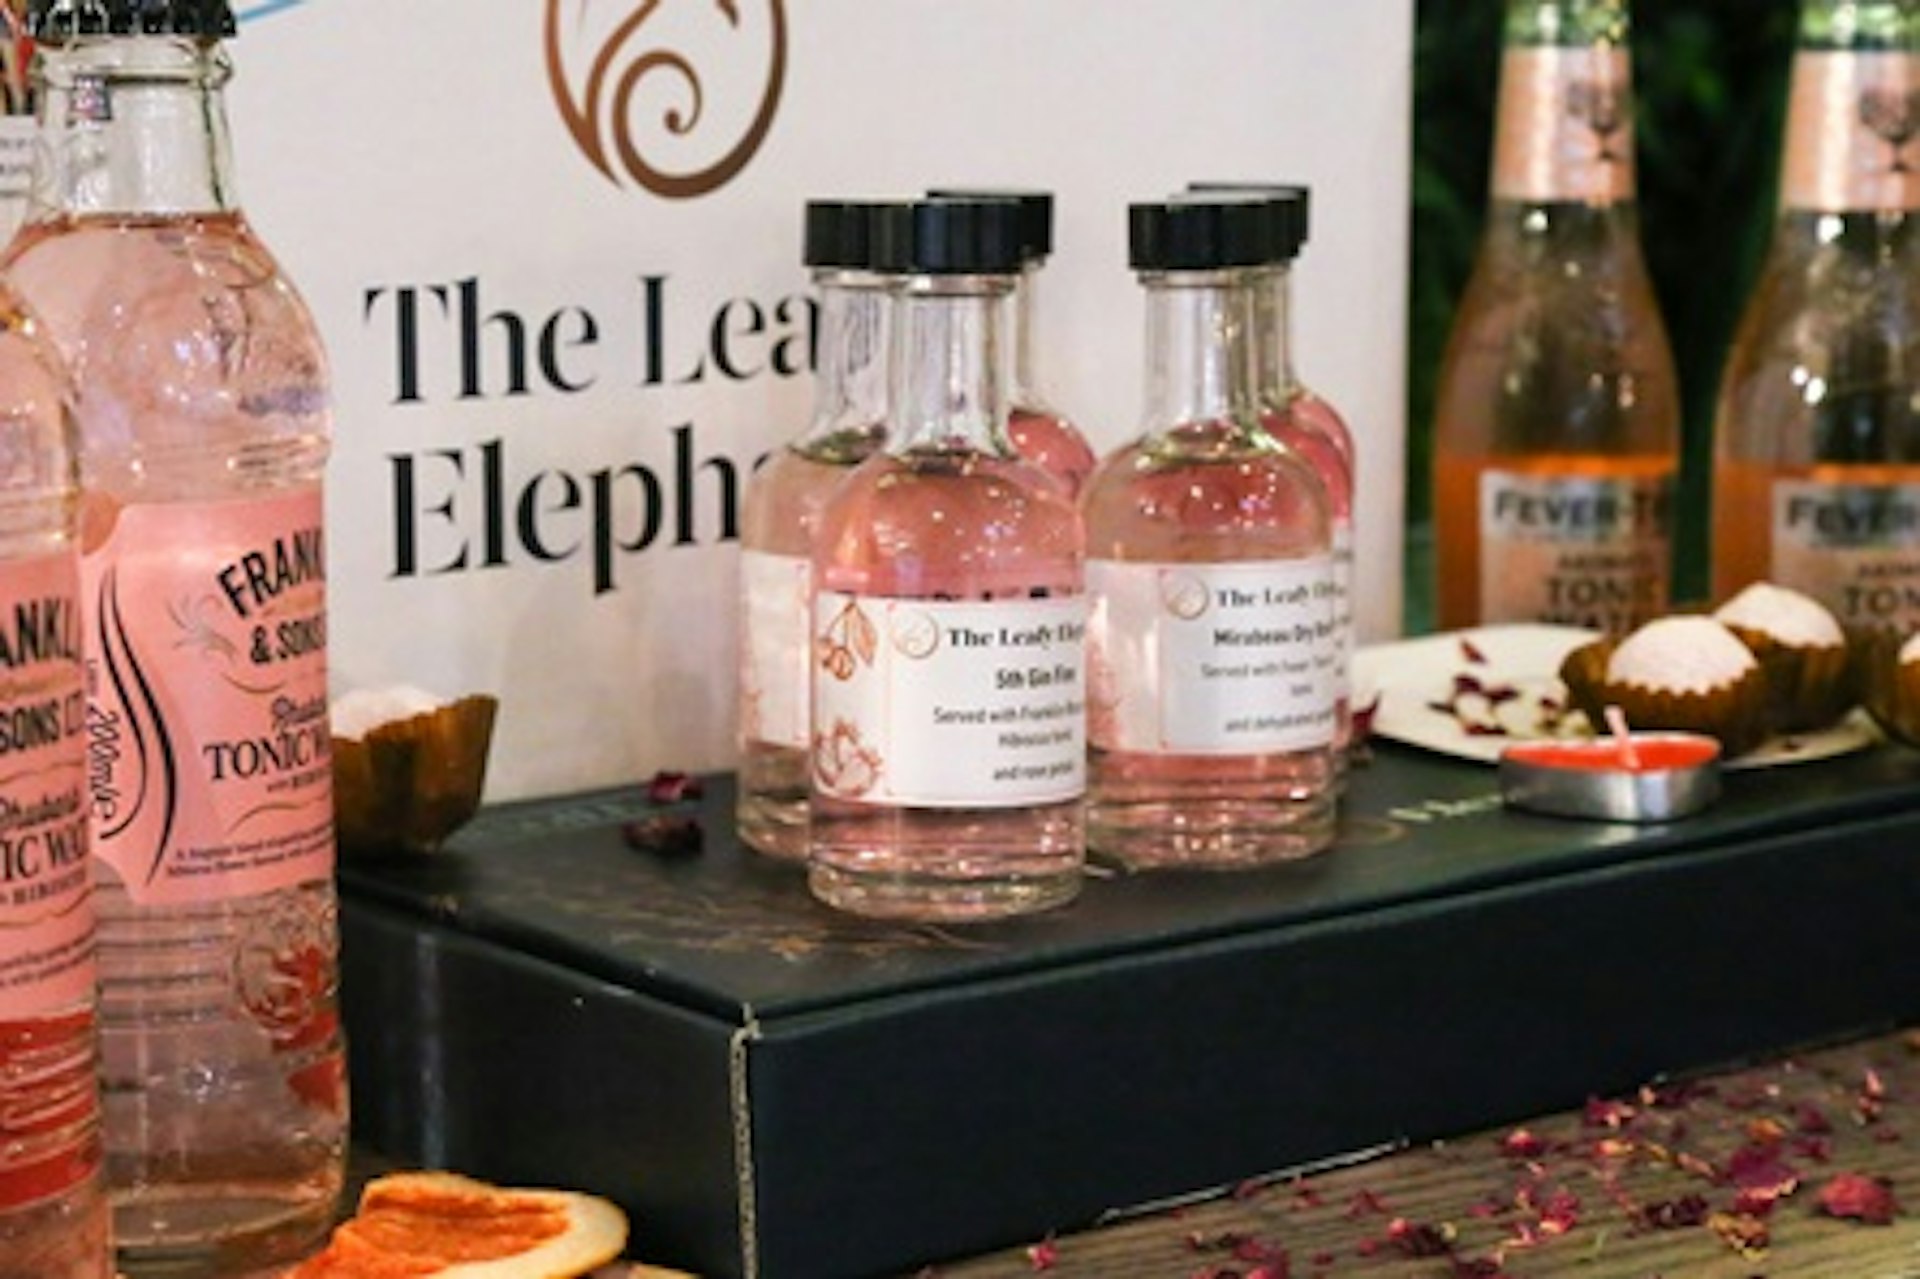 At Home Date Night Gin Tasting Experience for Two from The Leafy Elephant 3